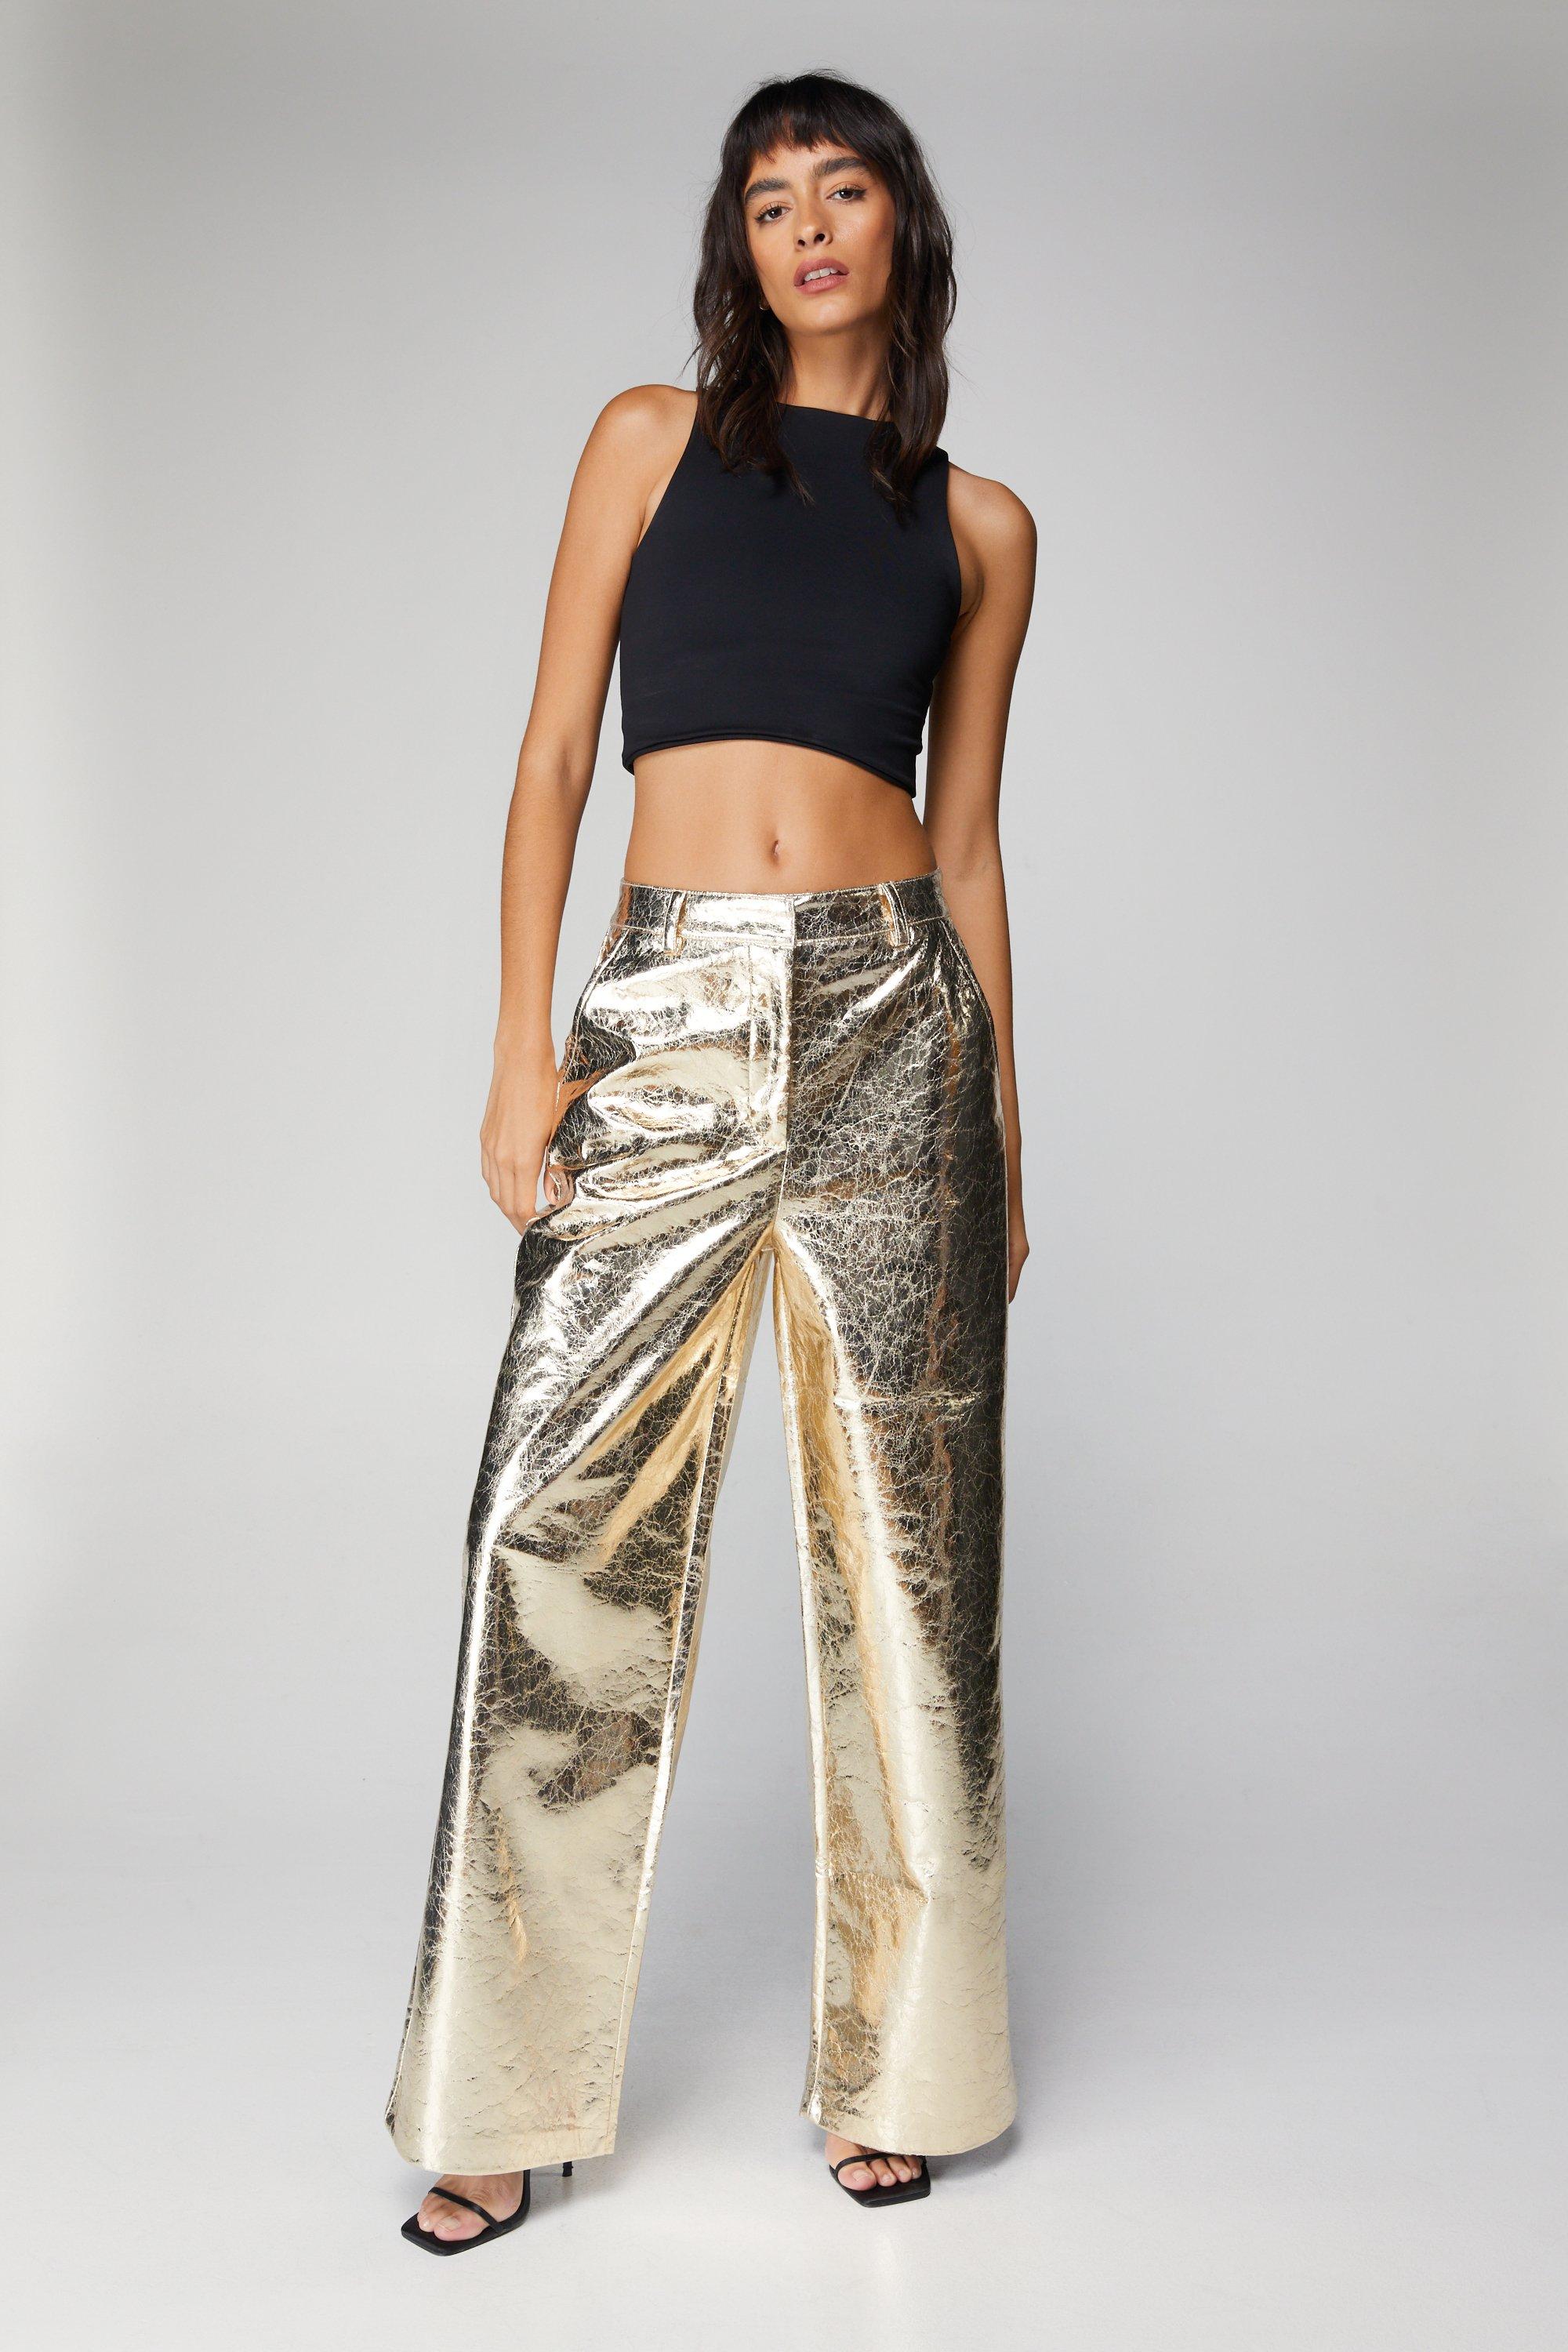 Culeze Women's Shiny Sequin Flared Pants High Waisted Bell Bottom Rave Wide  Leg Pants Trousers Clubwear Gold S at Amazon Women's Clothing store